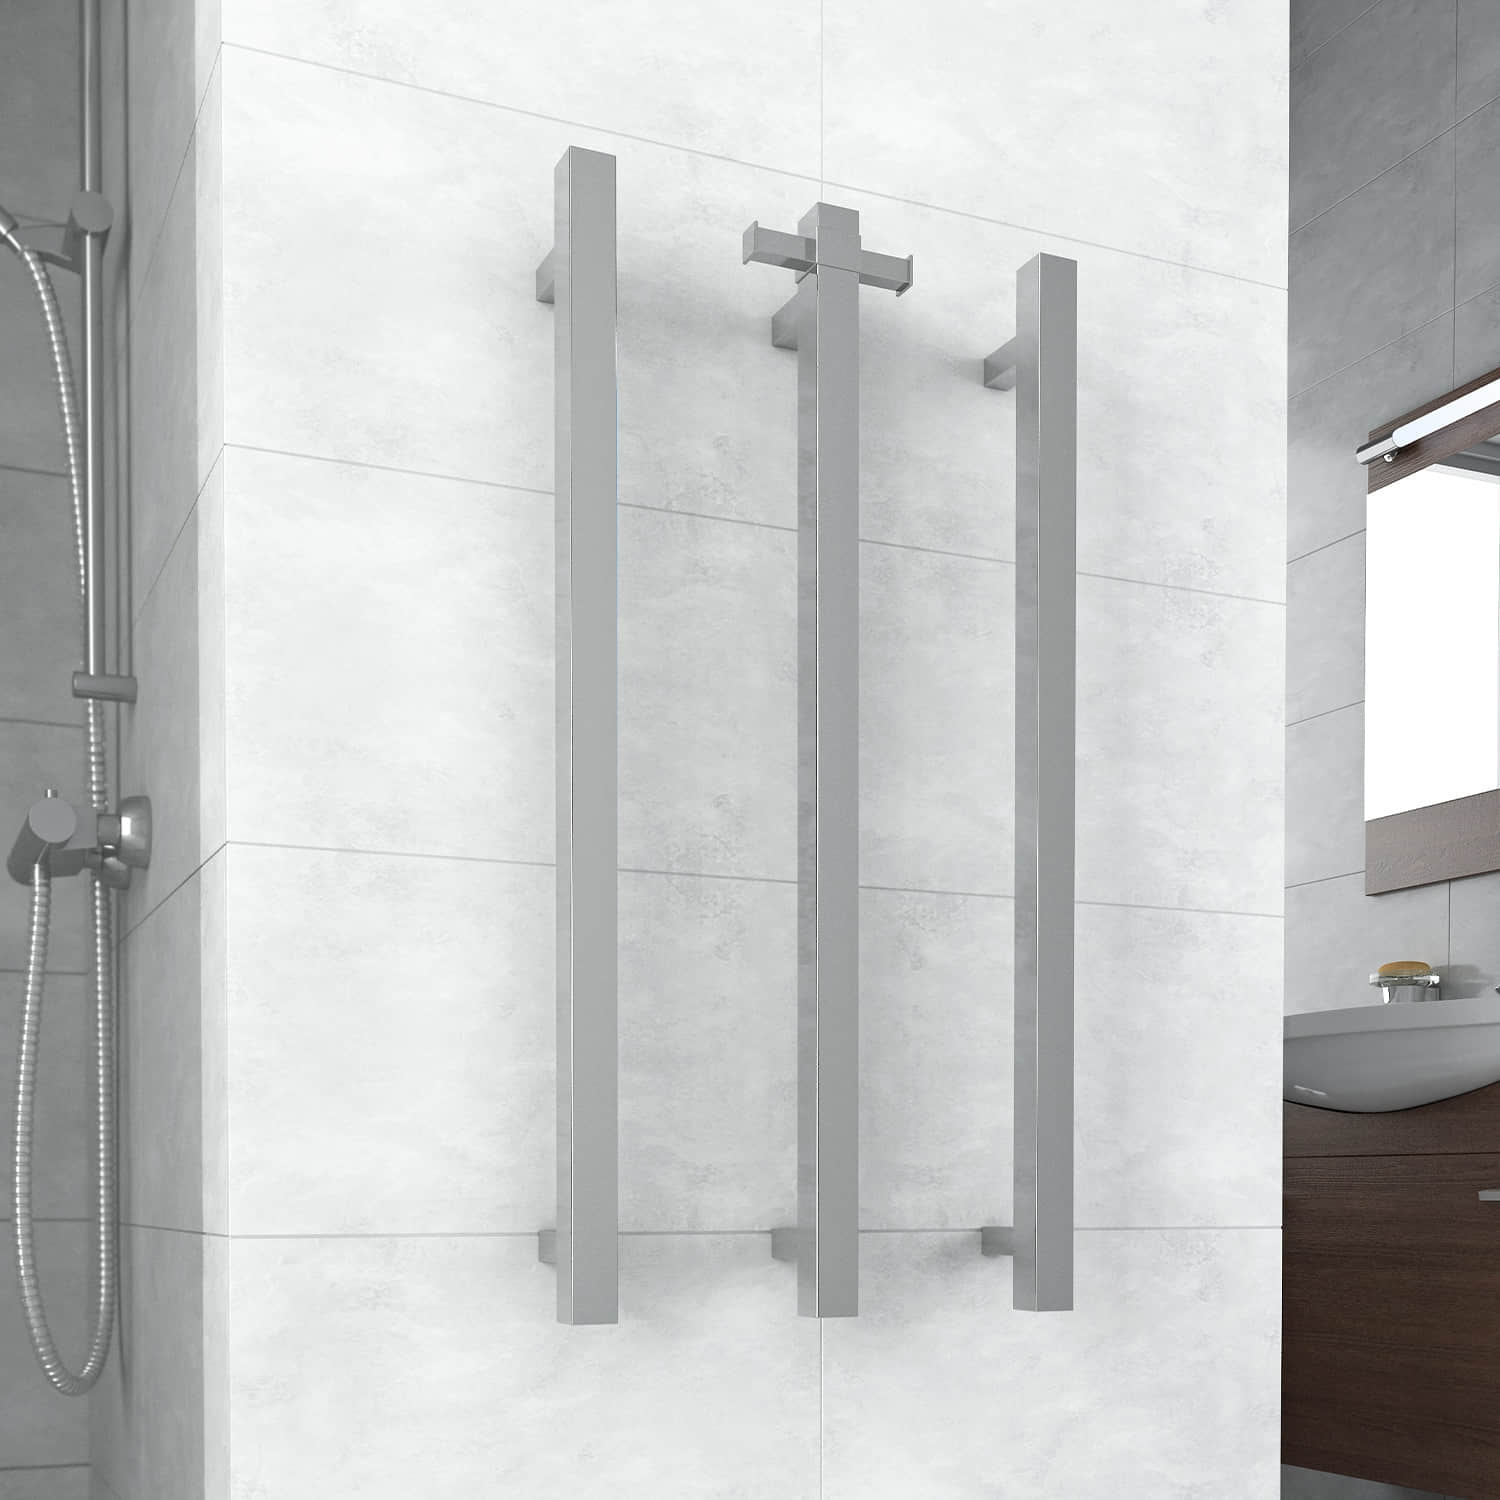 Square Single heated towel rail from Infinity Plus bathrooms deliver AU wide